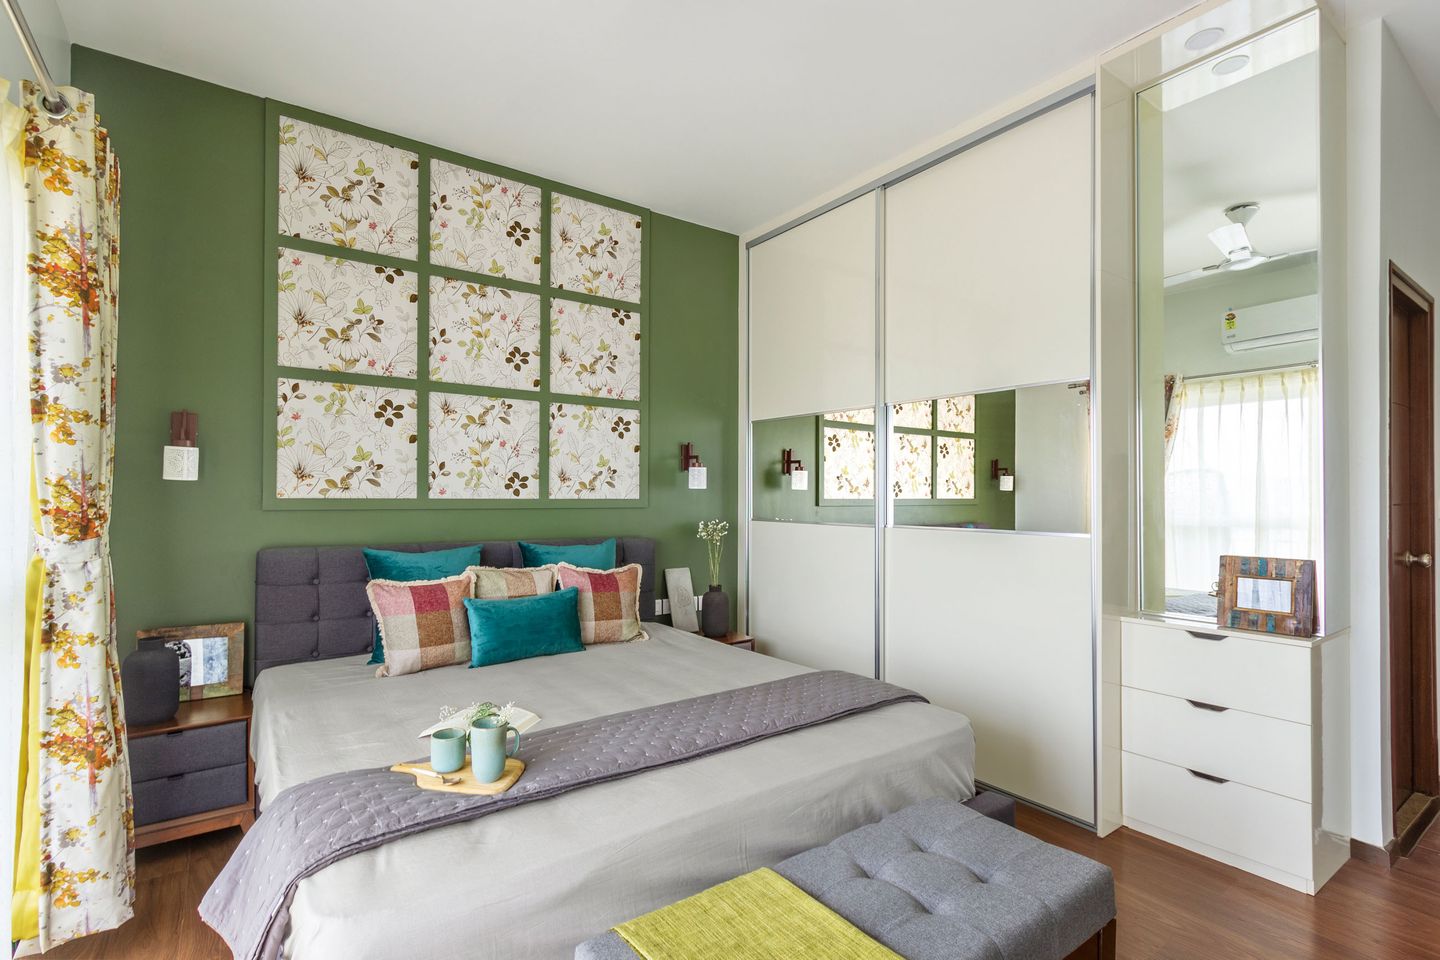 Bedroom Design With Bright Green Accent Wall And Floral Wallpaper - Livspace